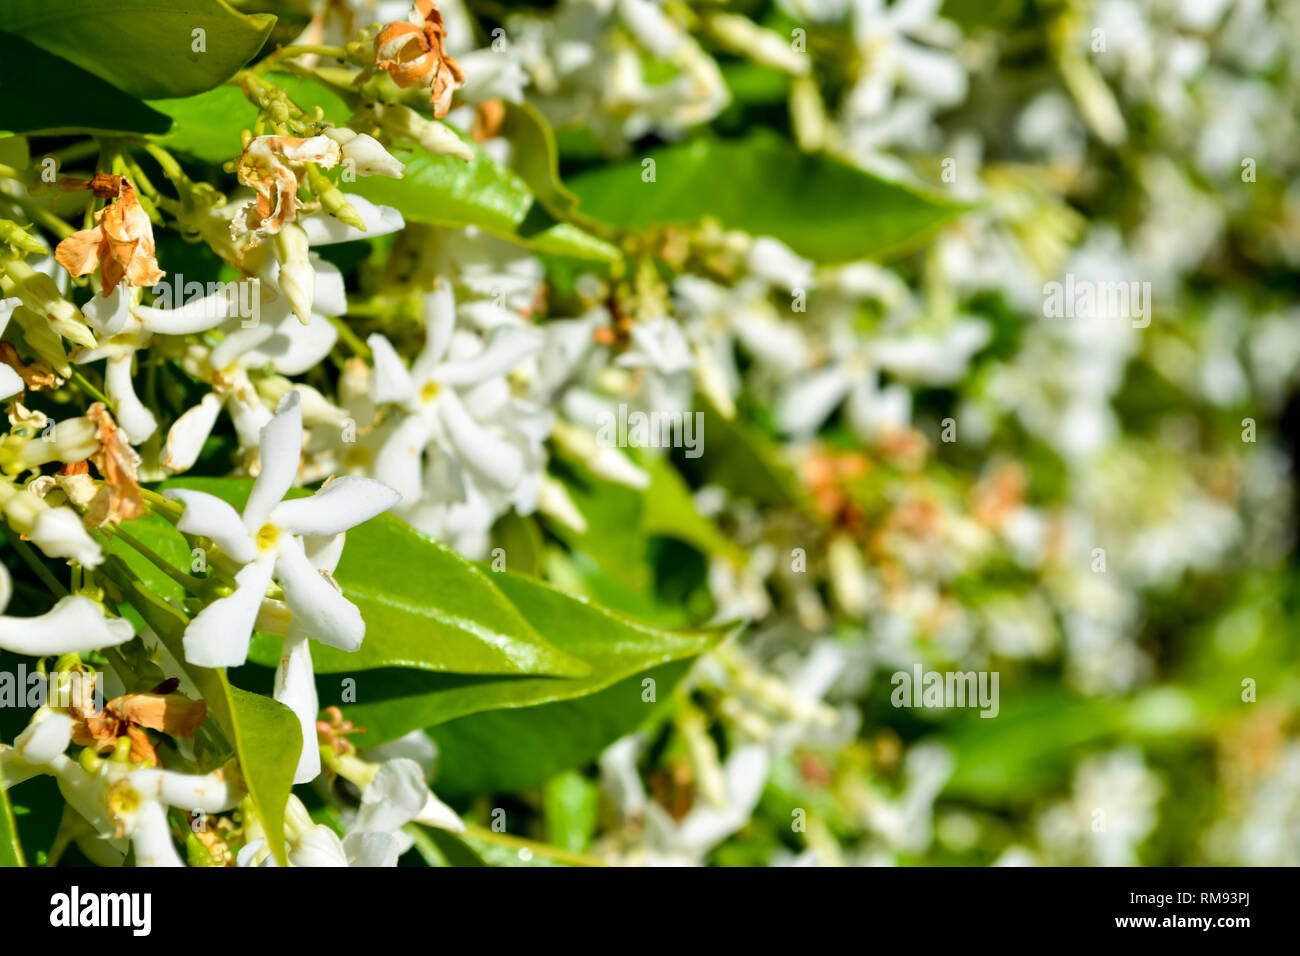 A wall of Star Jasmine (Trachelospermum jasminoides) flowers with soft focus on the right side of the image Stock Photo